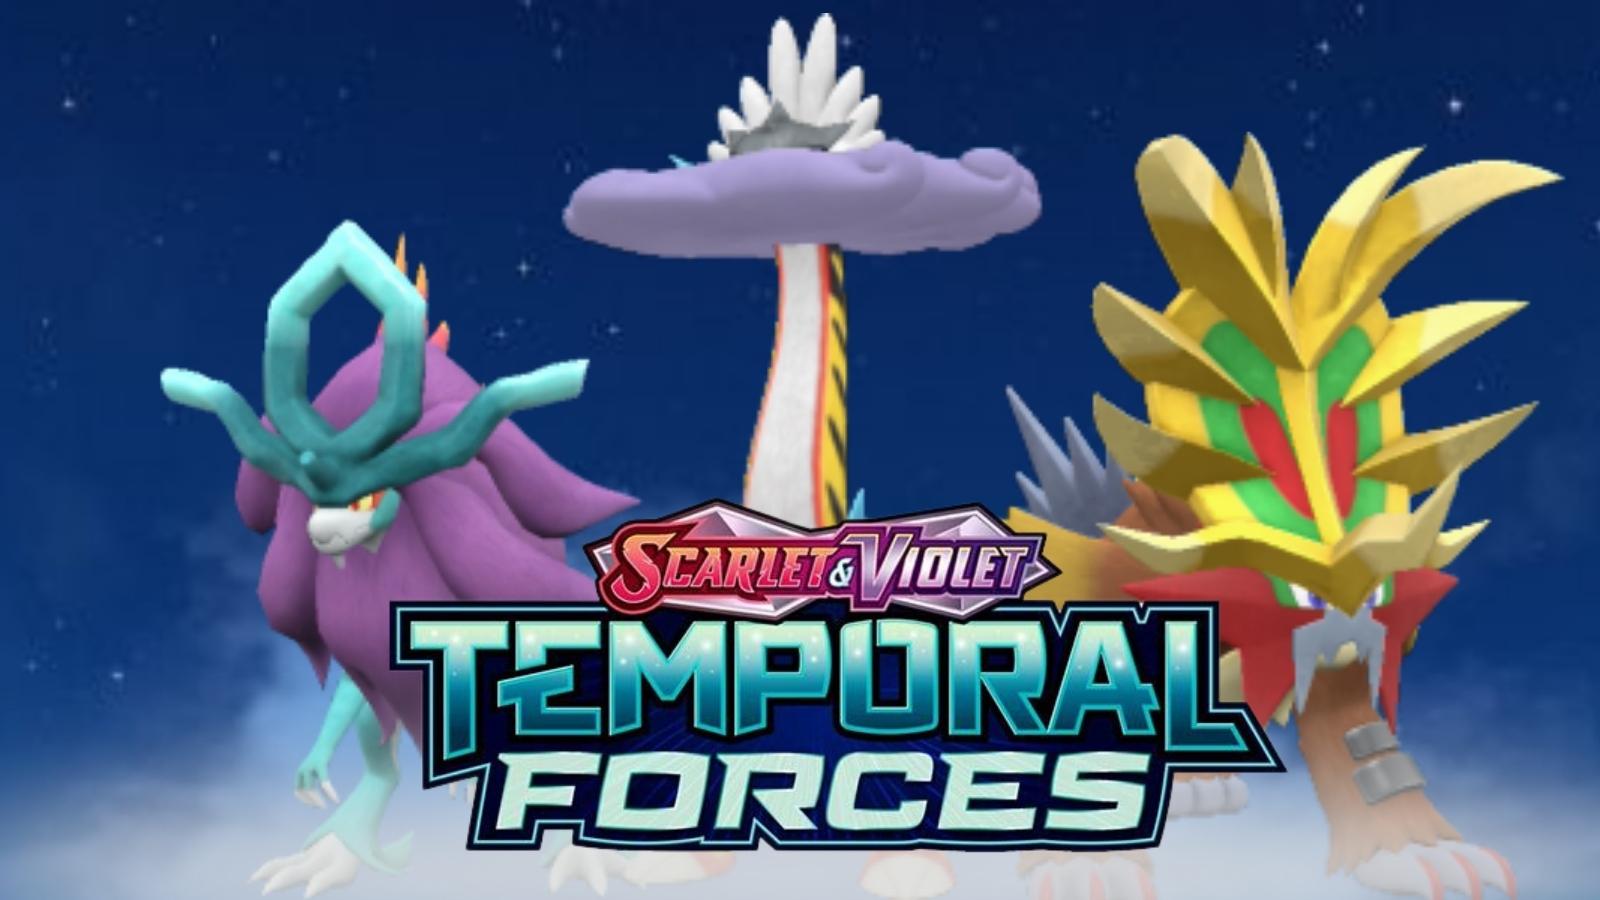 Pokemon Wild Force and Cyber Judge showing Gouging Fire, Walking Wake and Raging Bolt